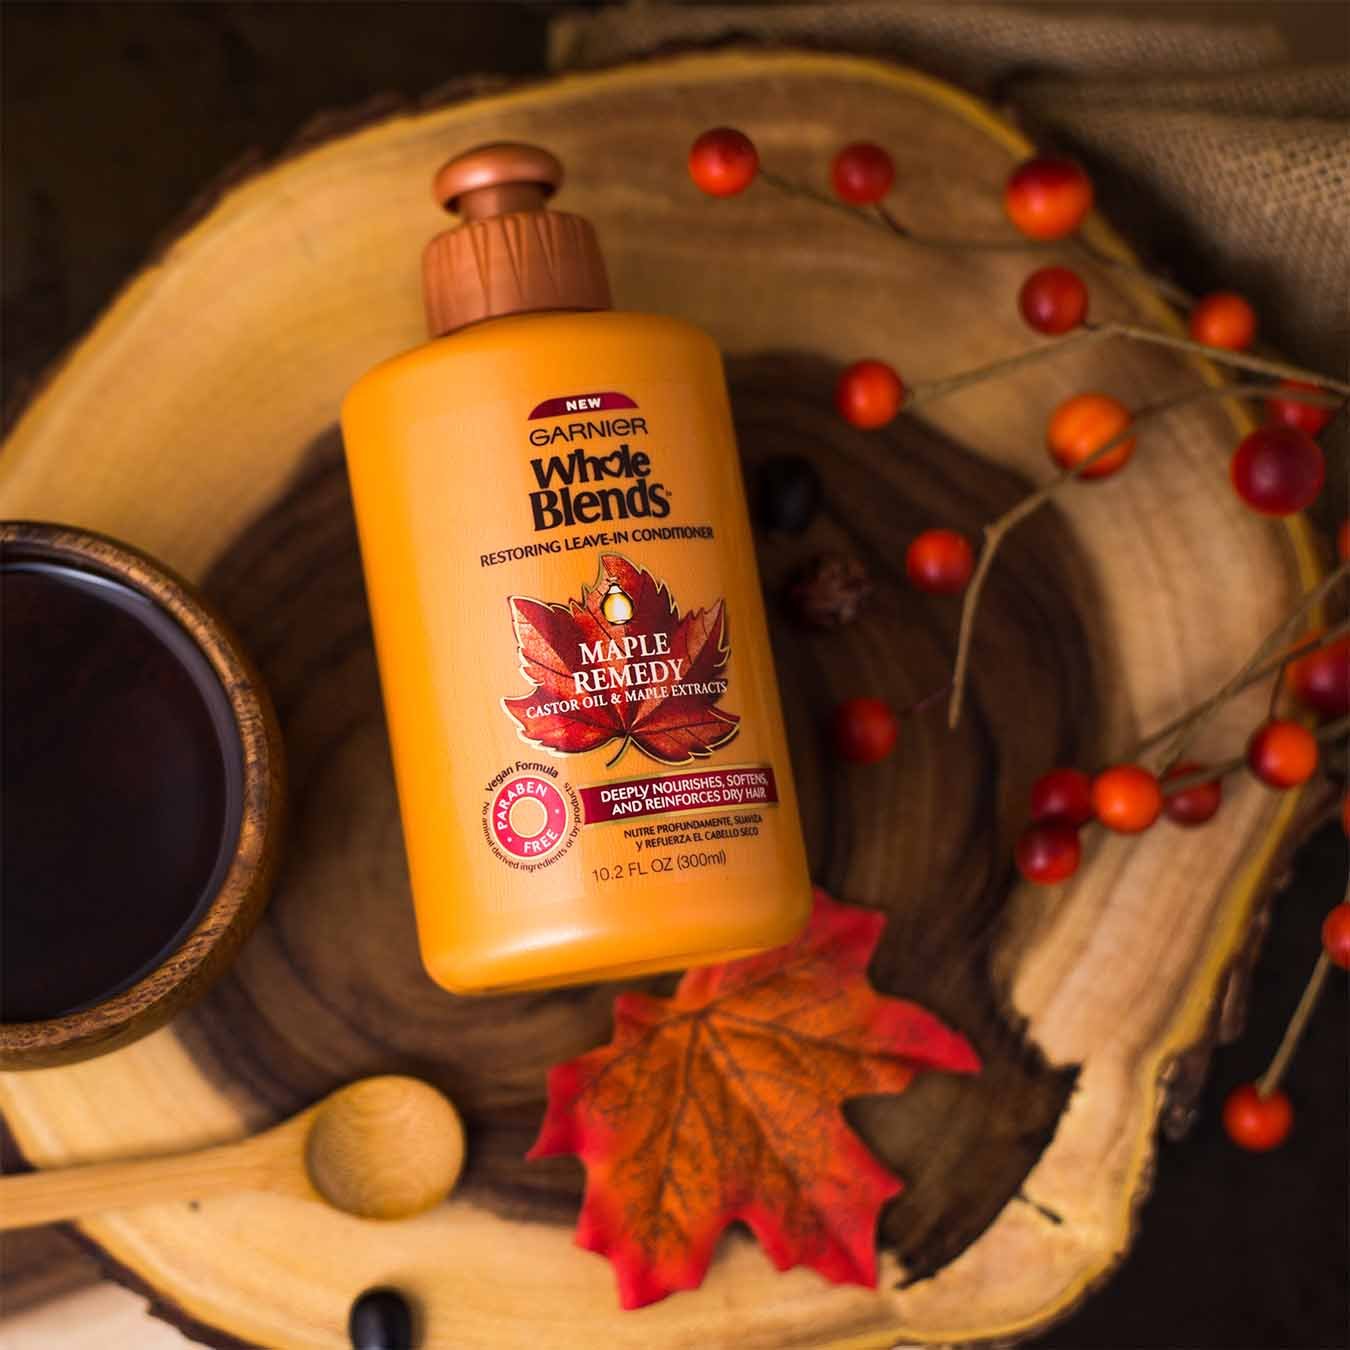 Whole Blends Maple Remedy Leave-In Conditioner with Caster Oil and Maple Extracts falling into a wooden bowl that contains a leafless bough of cranberries, a small wooden bowl of maple syrup, a wooden spoon, and a red-orange maple leaf on a woven cloth and wooden table.